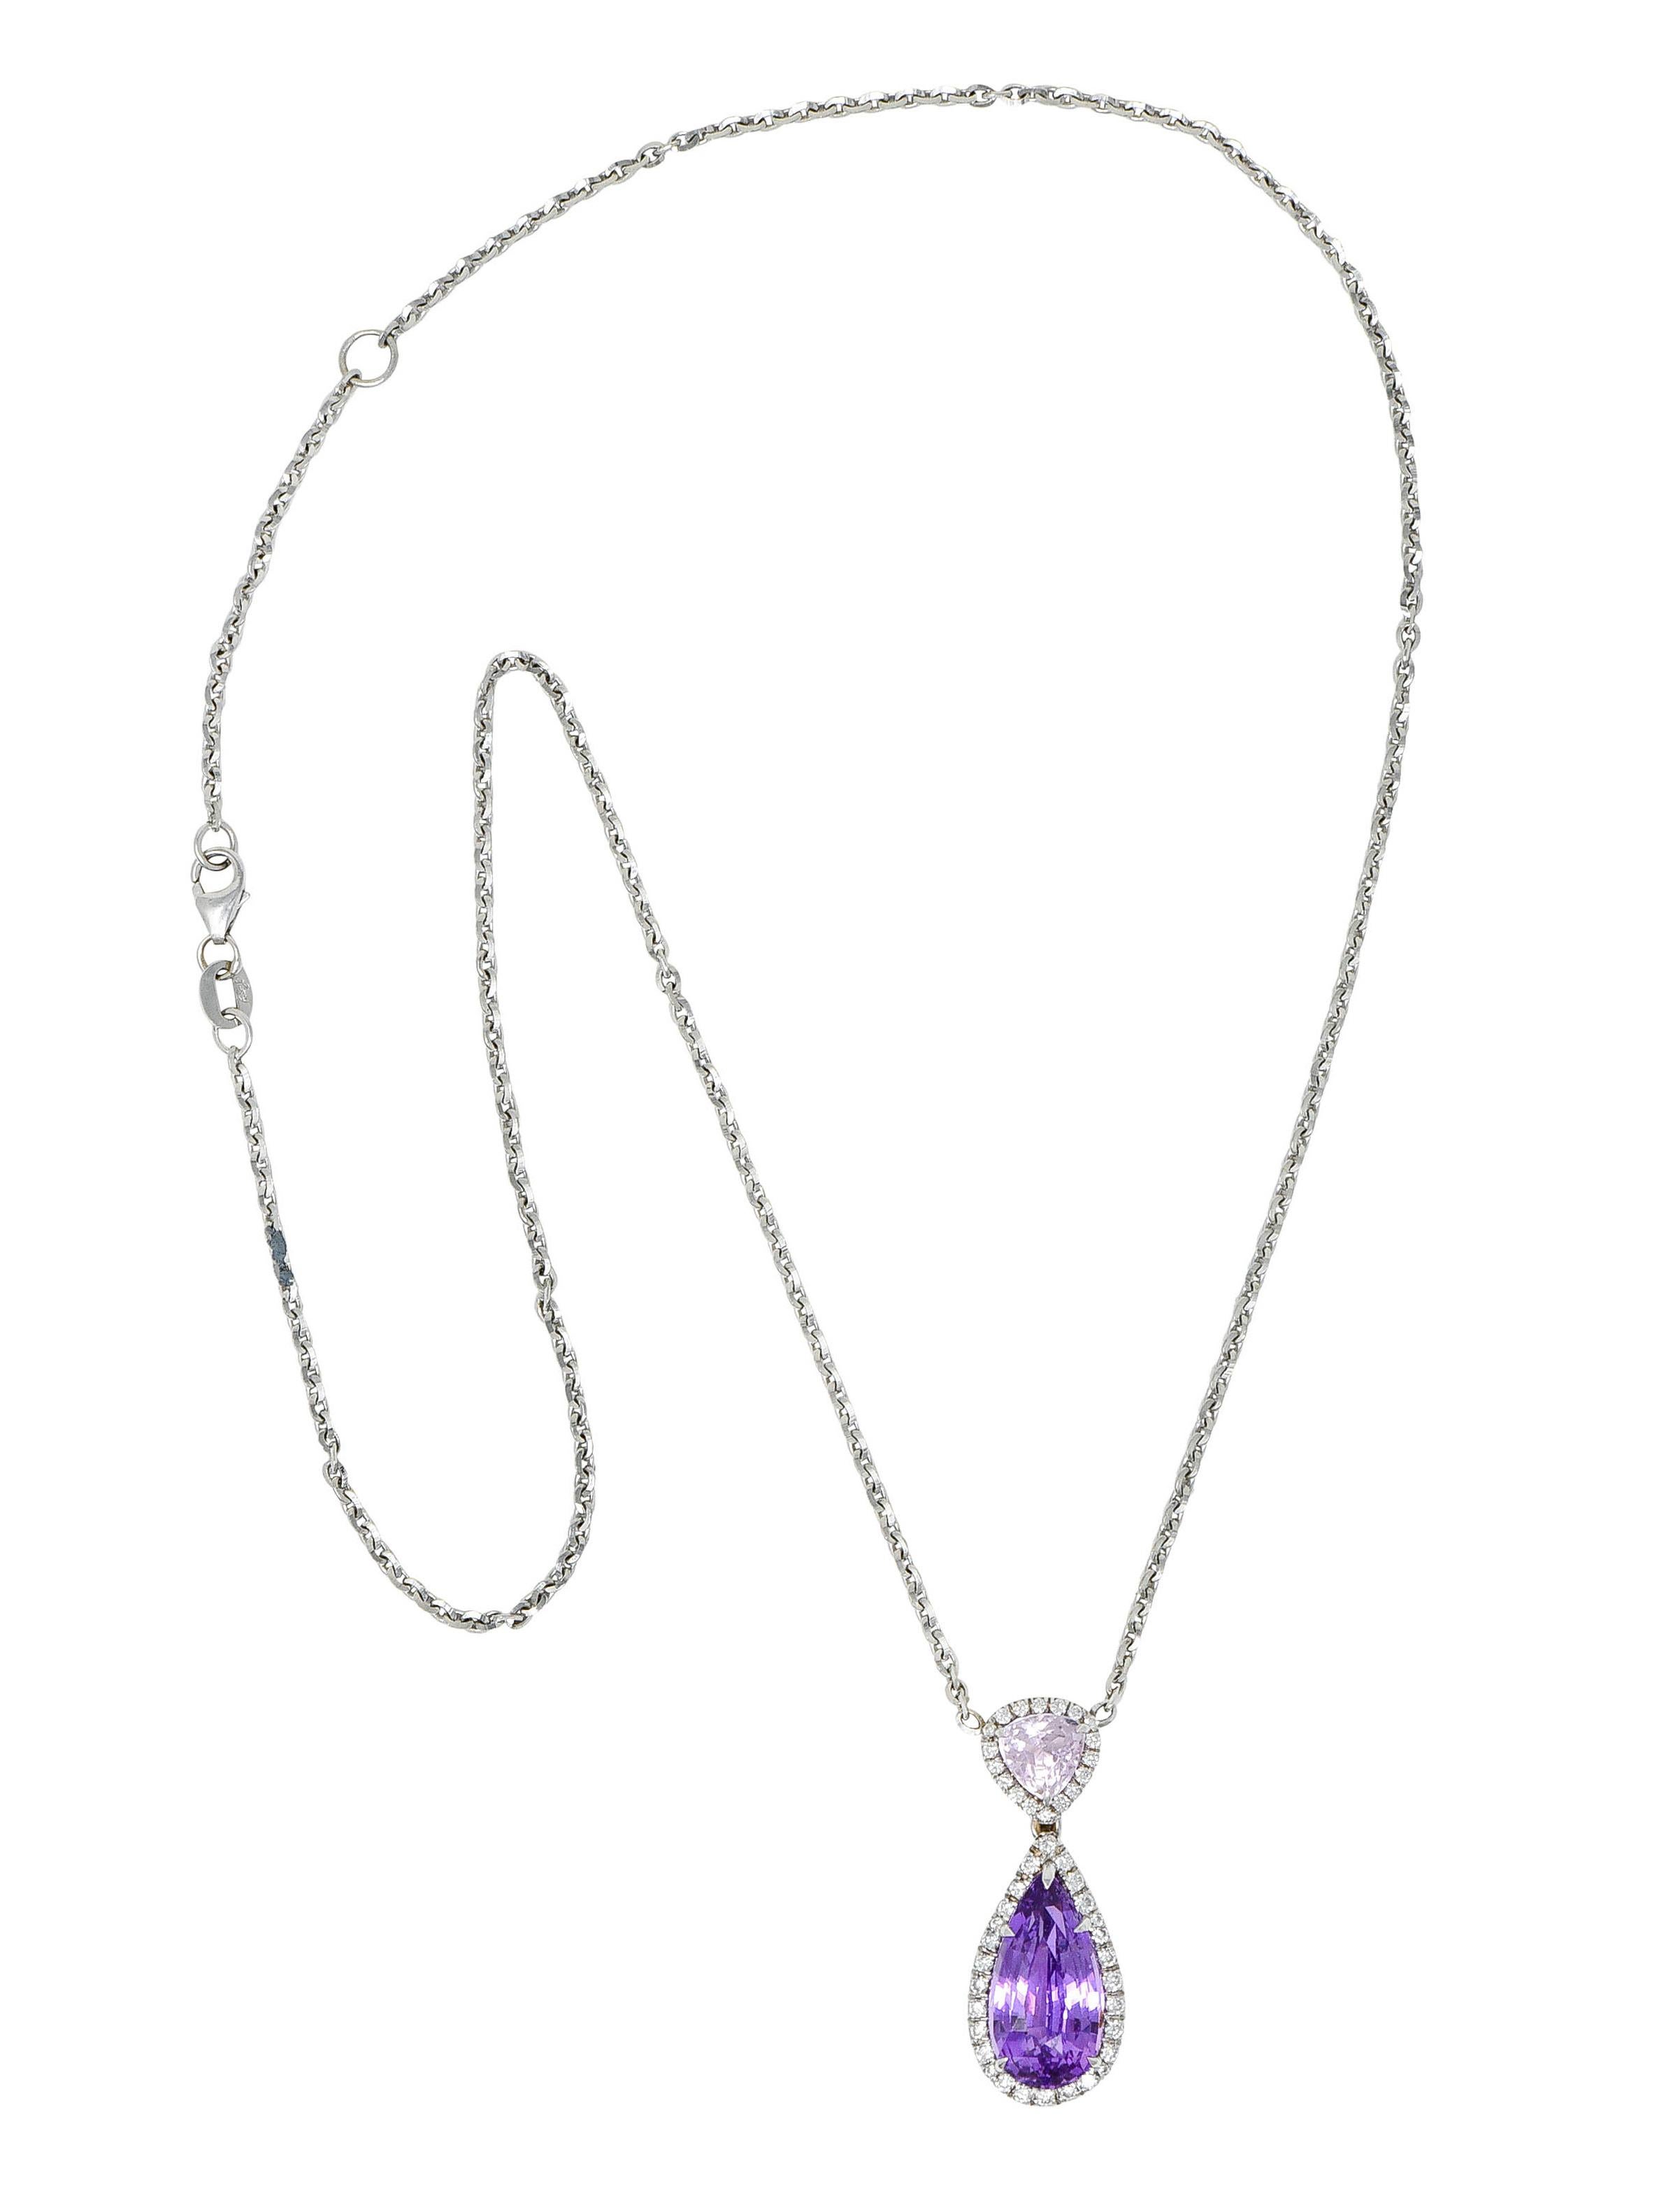 Faceted cable chain necklace centers a triangular surmount suspending a drop

Surmount features a triangular cushion cut kunzite gemstone - light pinkish purple in color

Contrasting a mixed pear cut sapphire weighing approximately 5.25